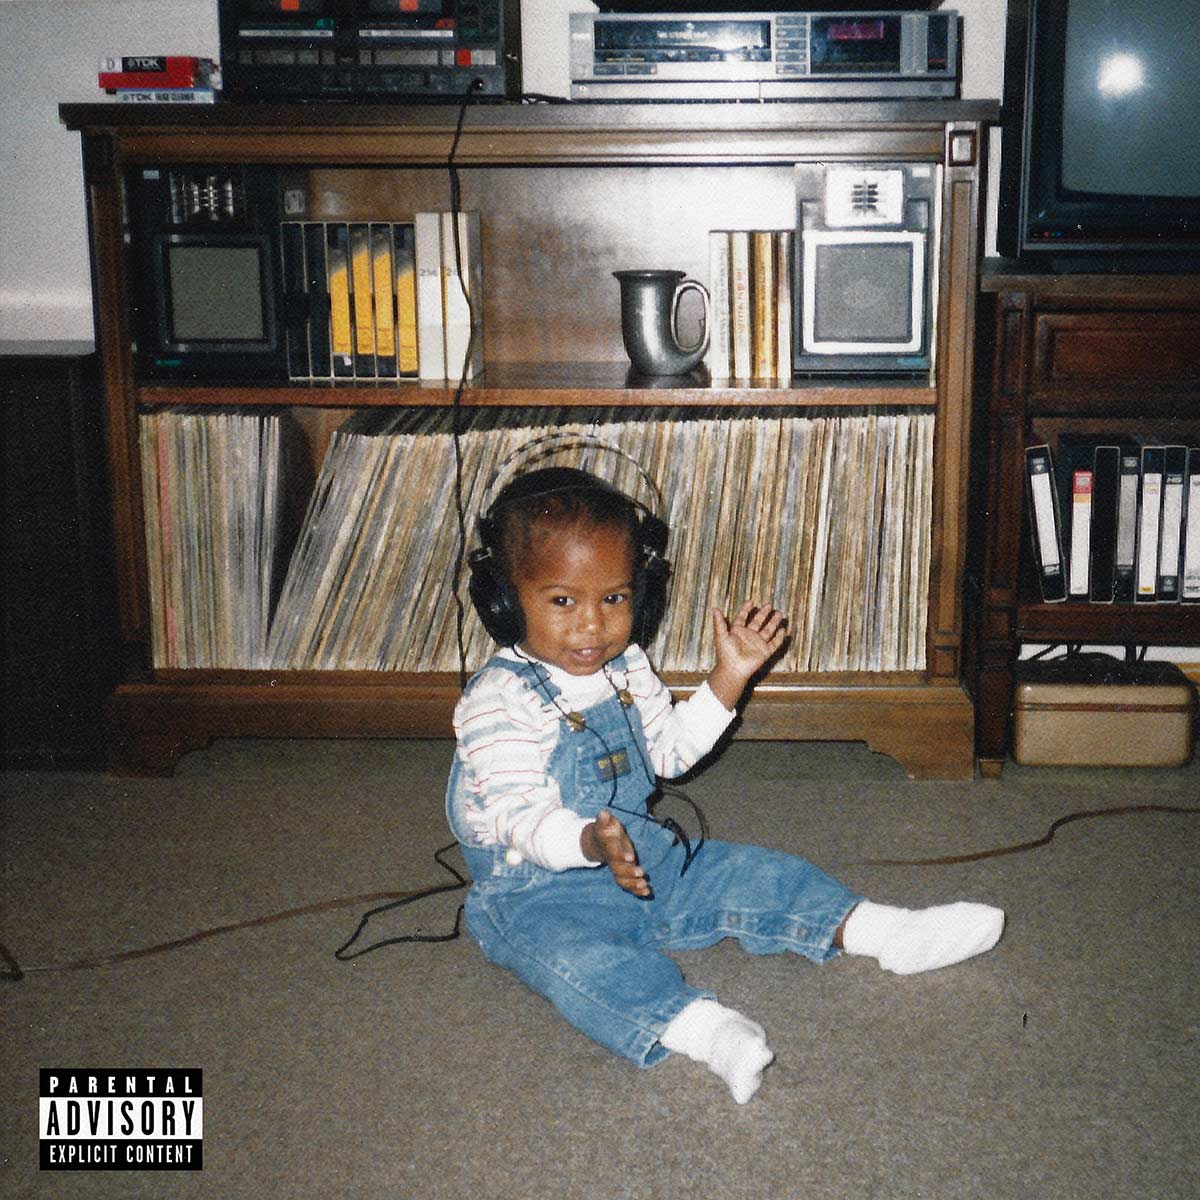 An older picture of a baby in overalls wearing headphones and sitting on the floor of a living room.